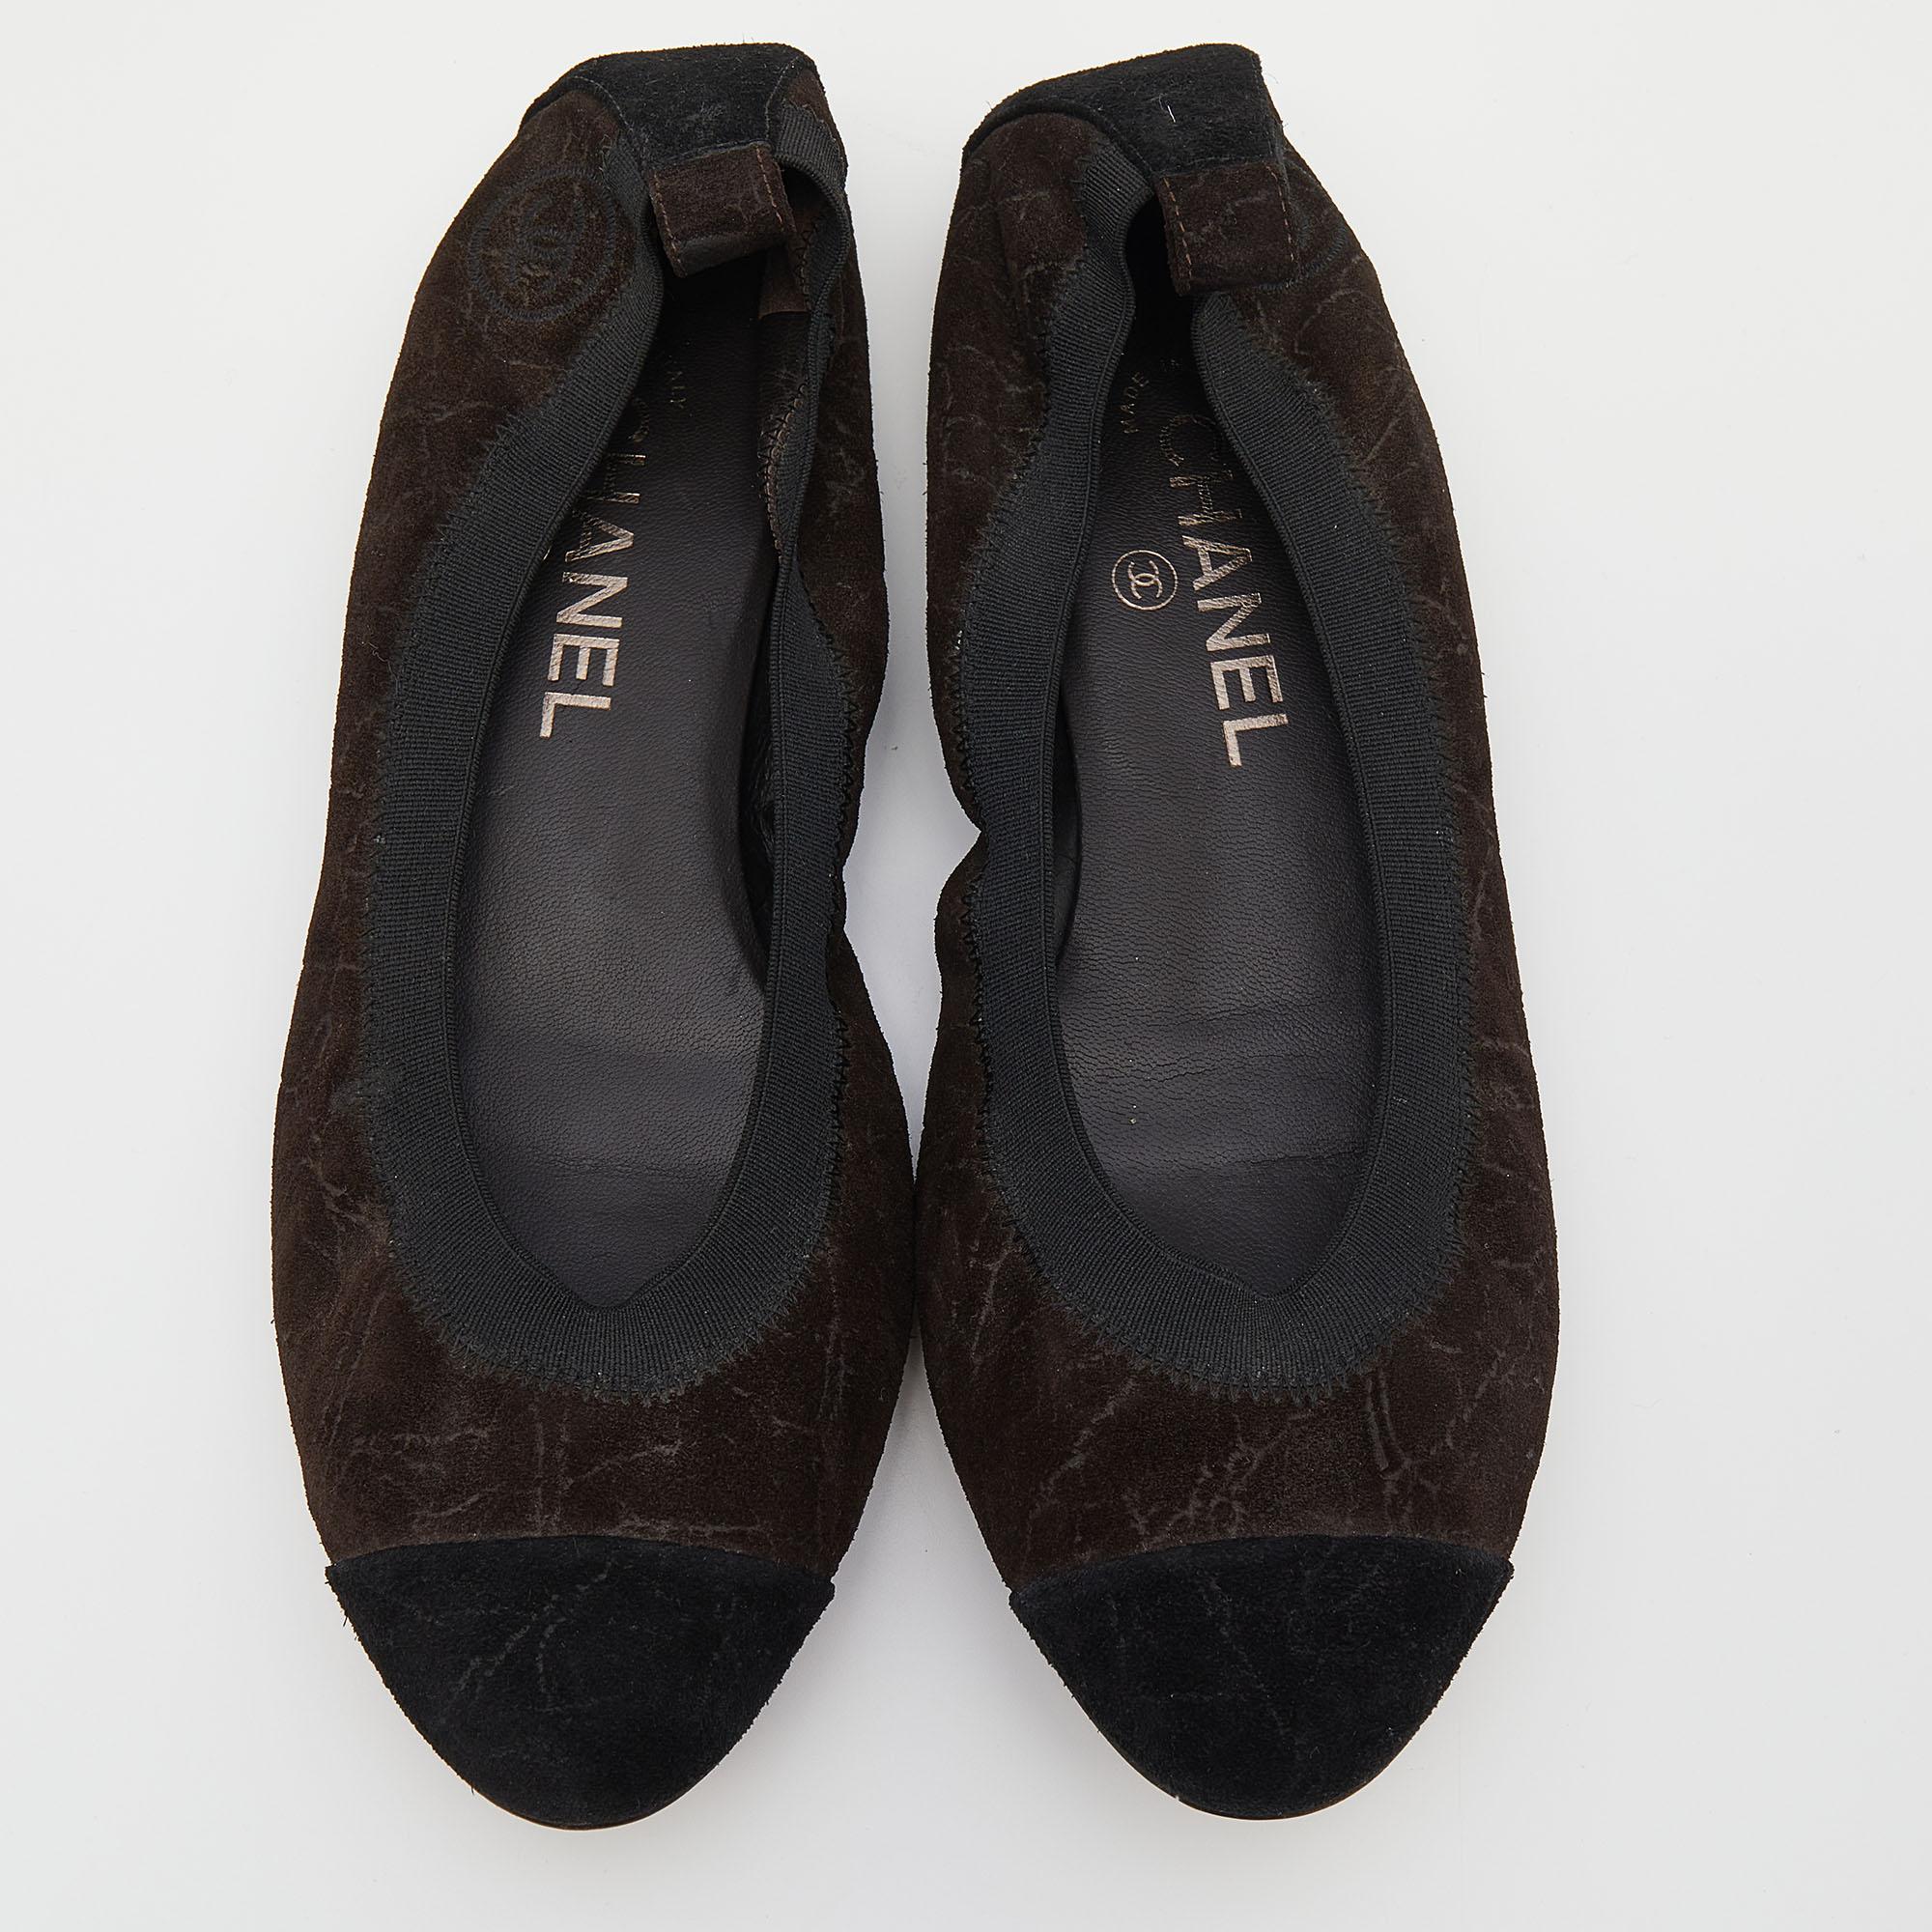 Chanel Ballet Flats 39 - 5 For Sale on 1stDibs